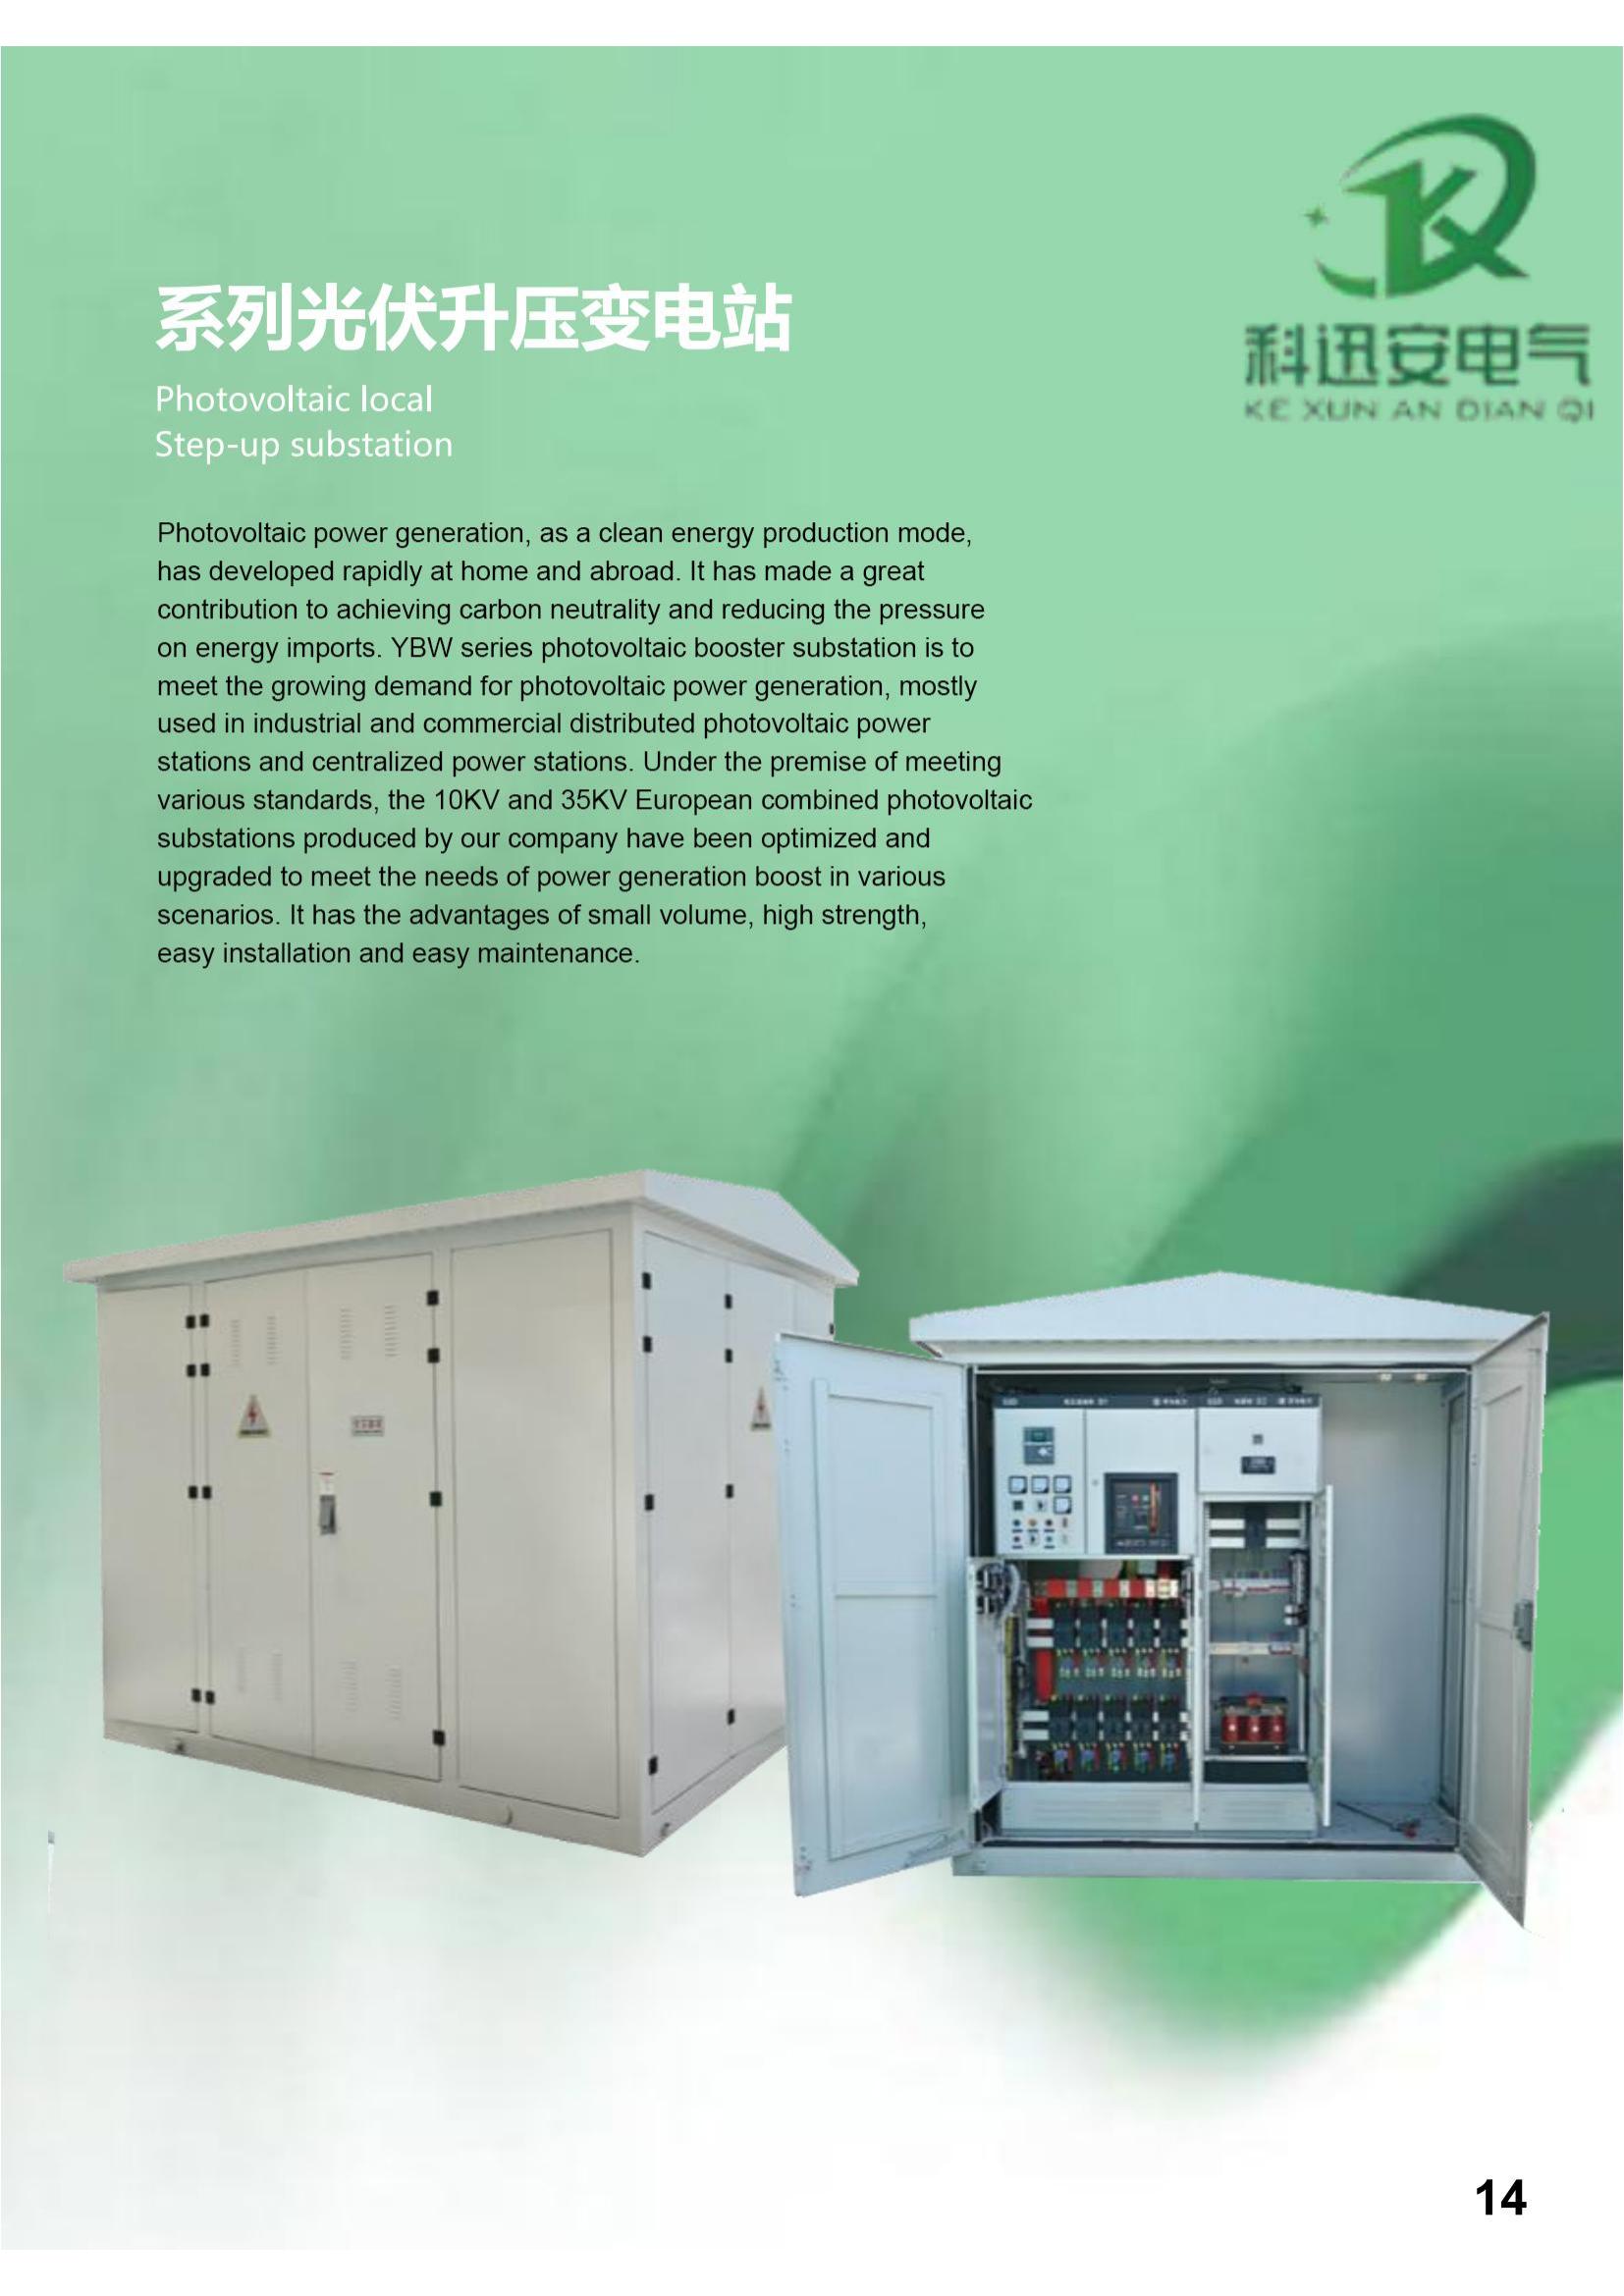 YBW series photovoltaic step-up substation